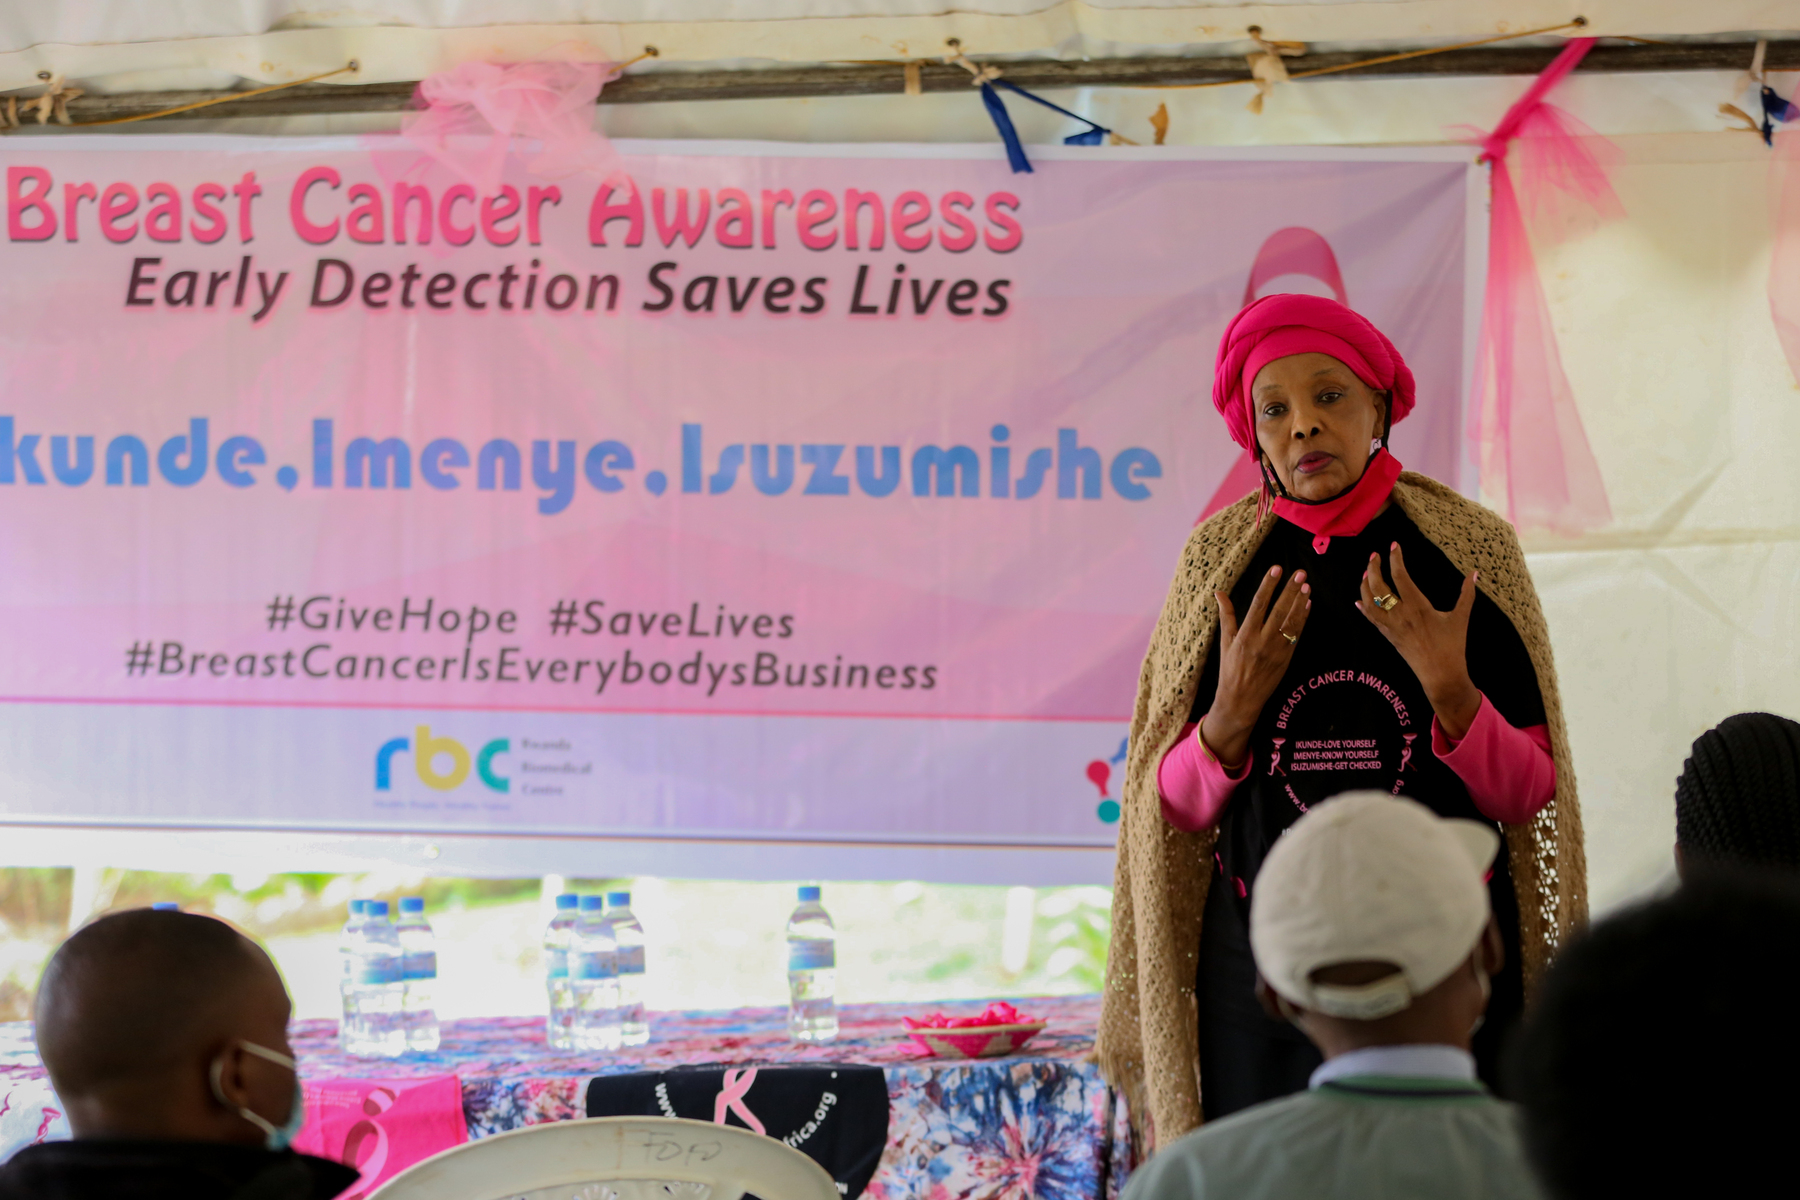 Philippa Kibugu founder of Breast Cancer initiative East Africa speaks on breast self examination and the vision of educates, nurtures, changes and save lives in East Africa on Oct 18, 2020.